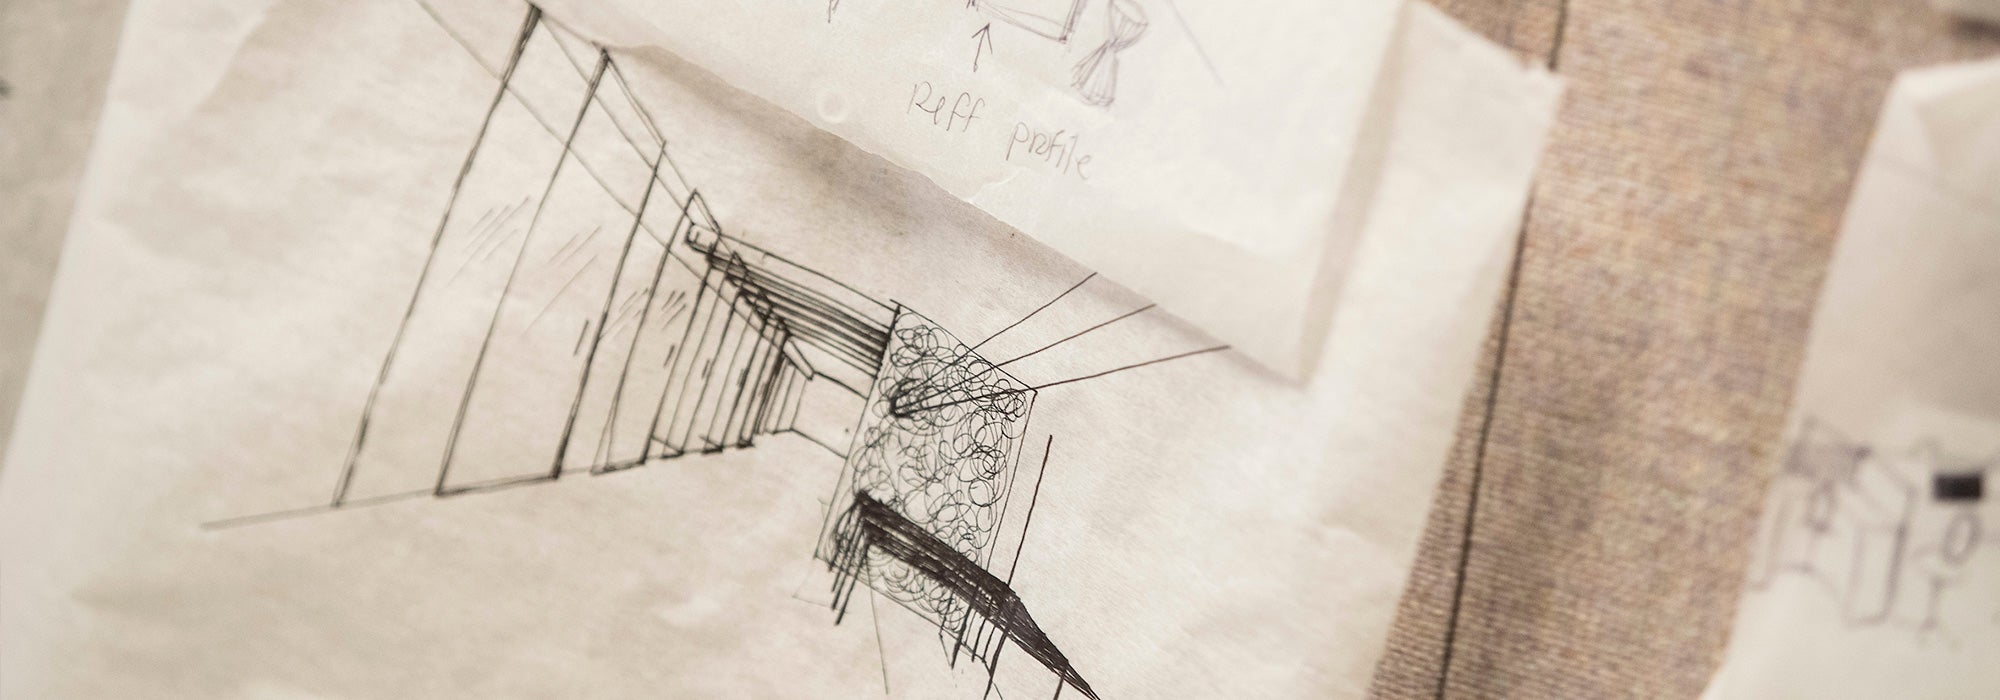 Preliminary sketches by an ECU student team detail workplace design for a Knoll showroom. (Photos by Cliff Hollis)